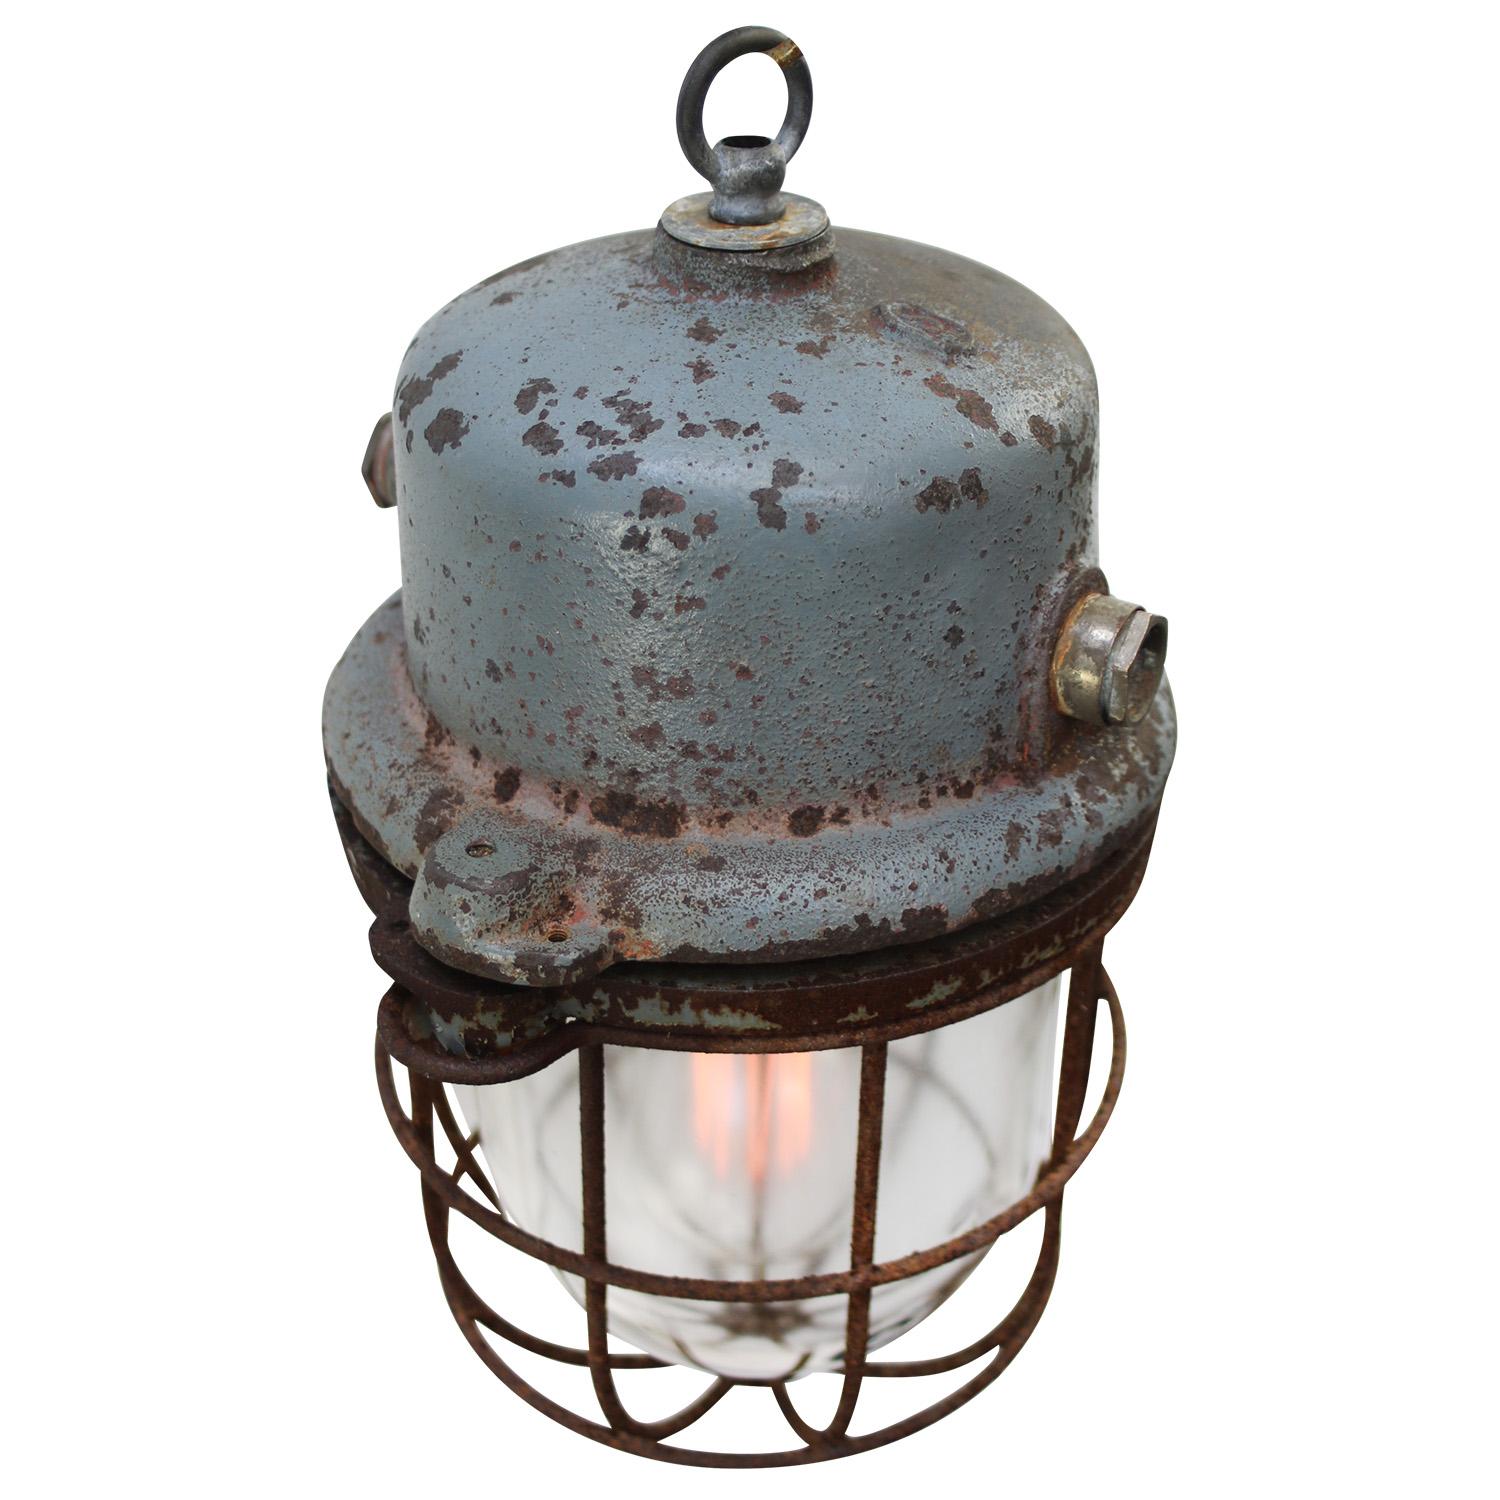 Vintage European industrial hanging lamp.
Cast iron with clear glass.

Weight 5.10 kg / 11.2 lb

Priced per individual item. All lamps have been made suitable by international standards for incandescent light bulbs, energy-efficient and LED bulbs.